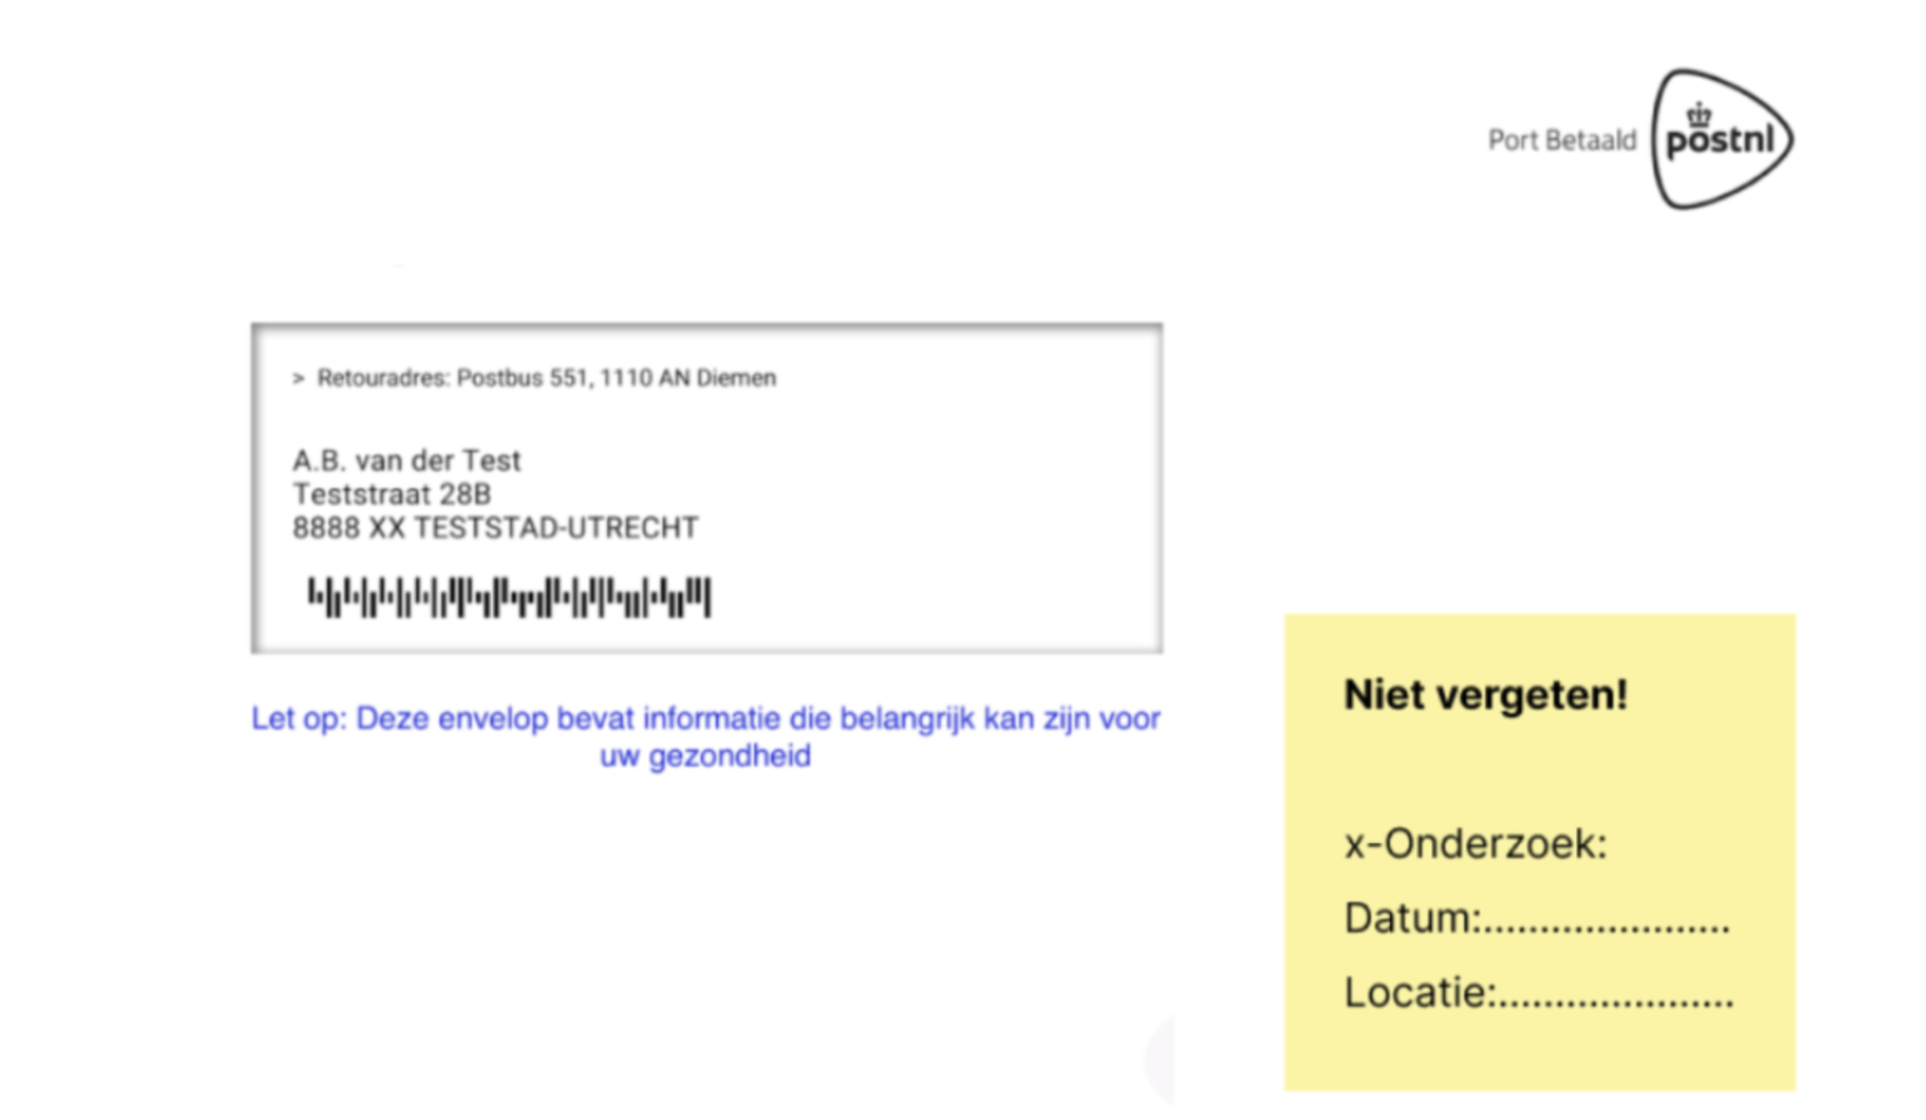 RIVM-CvB cancer screening research letter C - Accessibility of Cancer Screenings